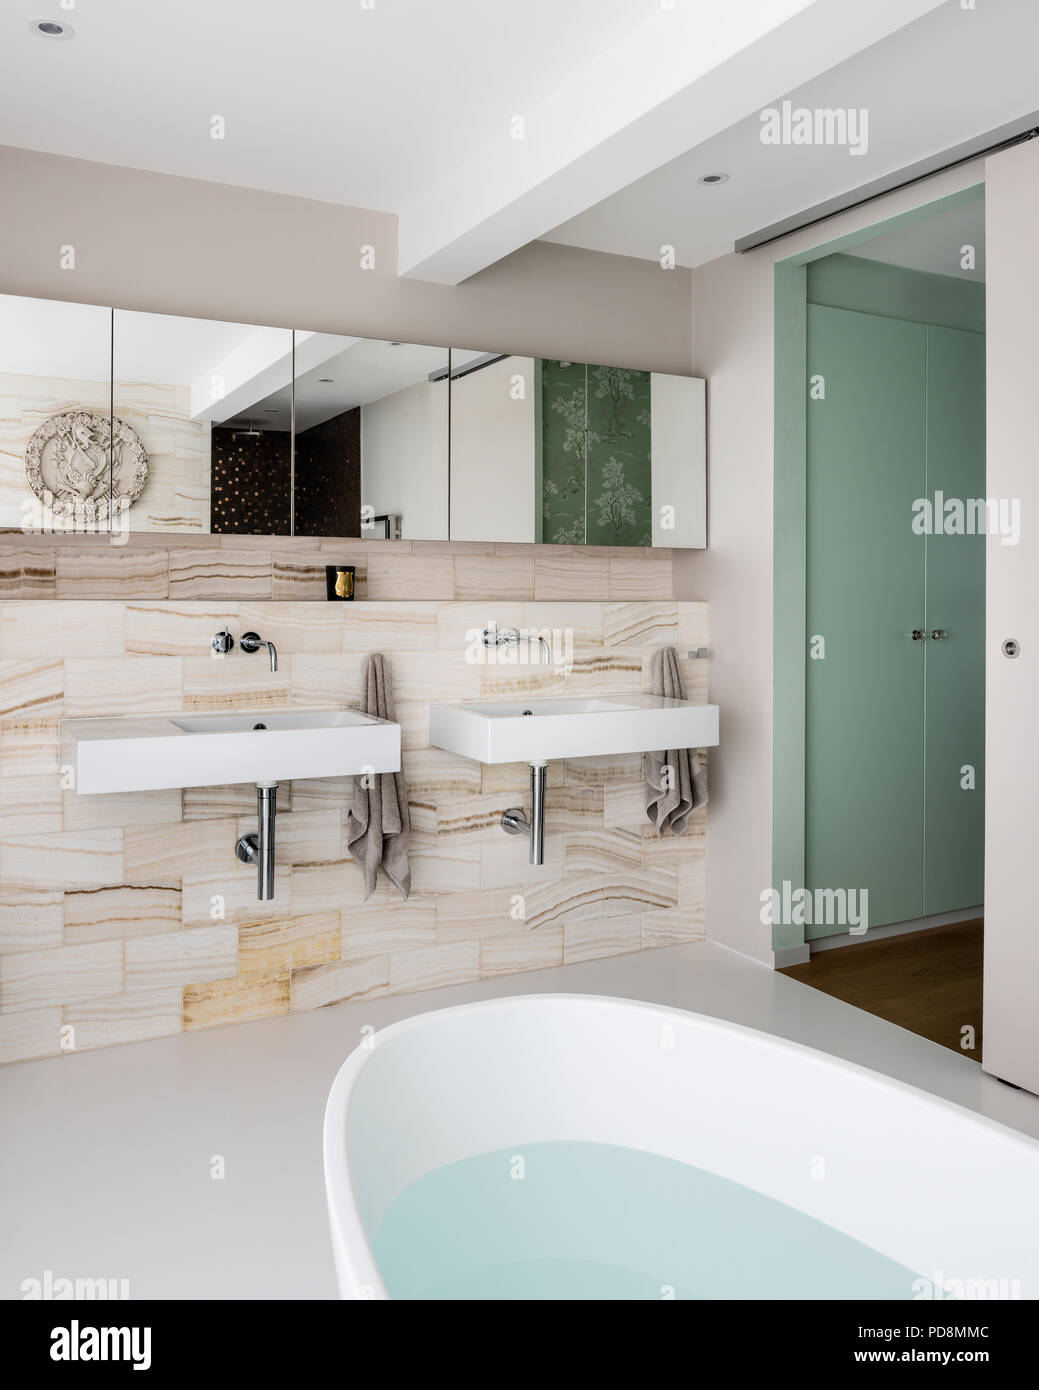 Mirrored cabinets above basins in ensuite bathroom Stock Photo